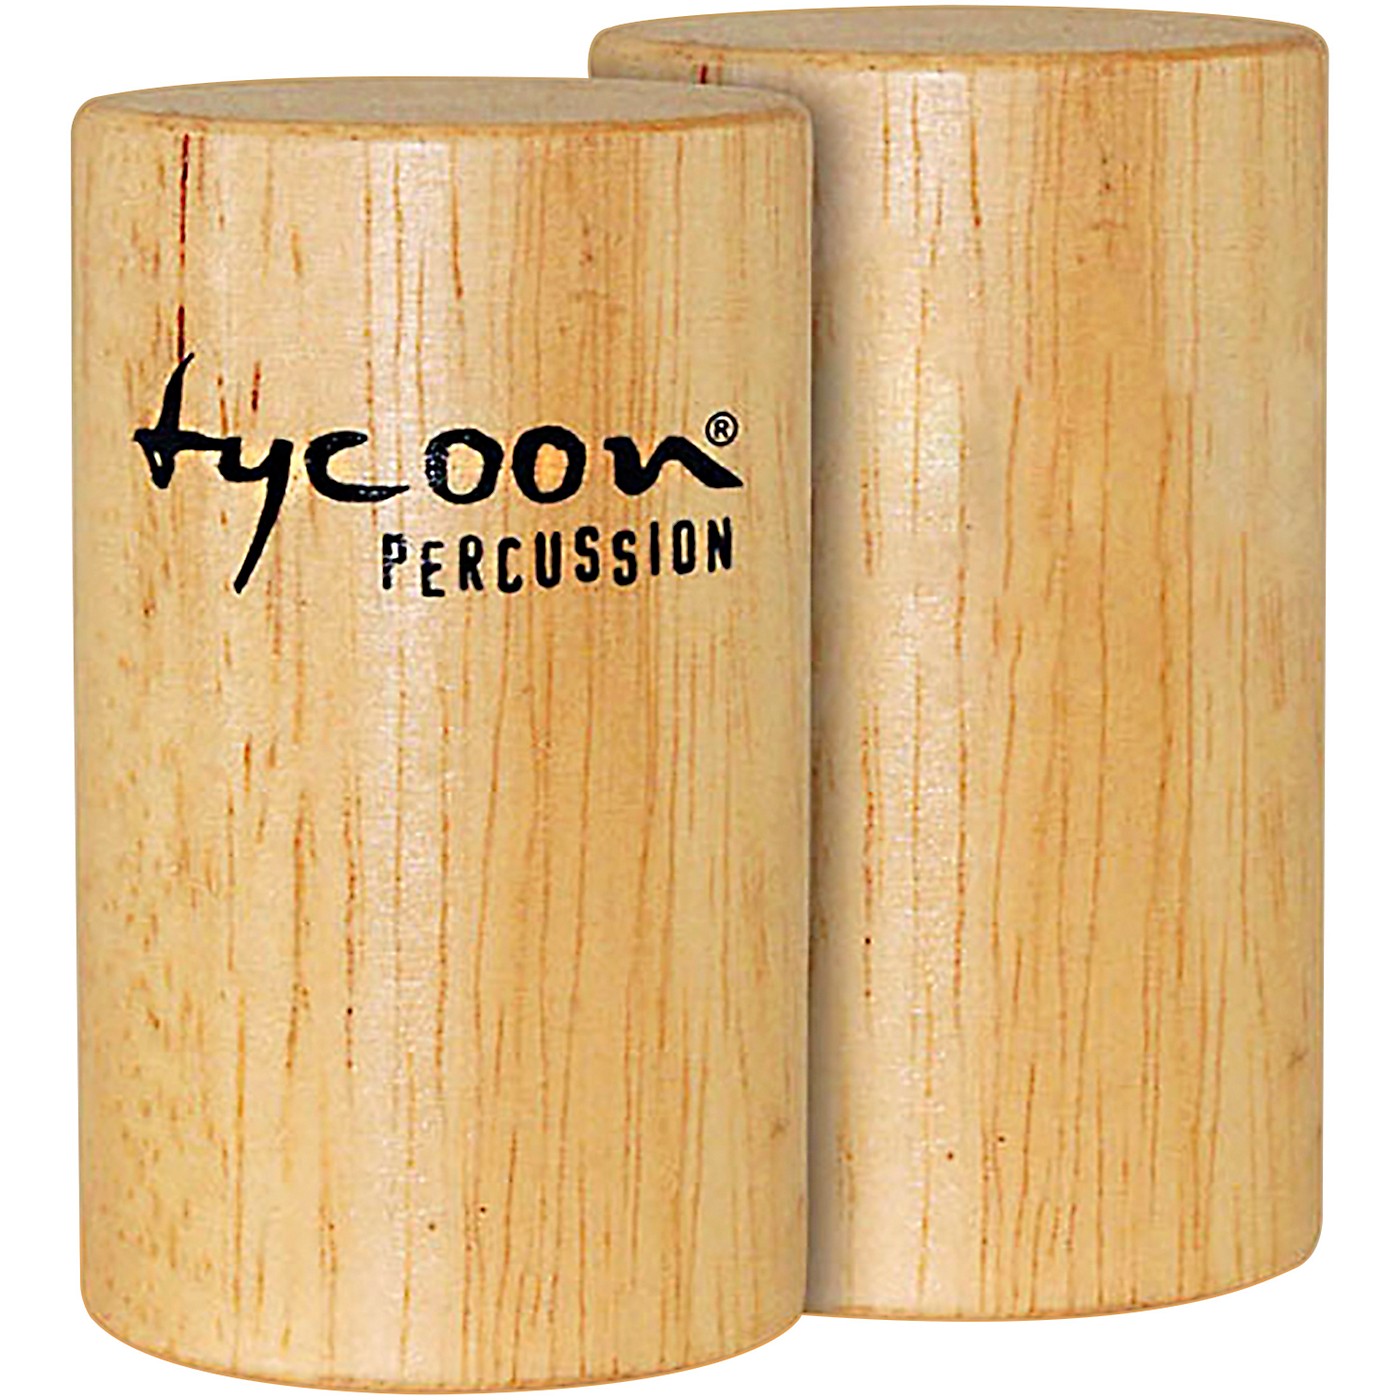 Tycoon Percussion Small Round Wooden Shaker thumbnail